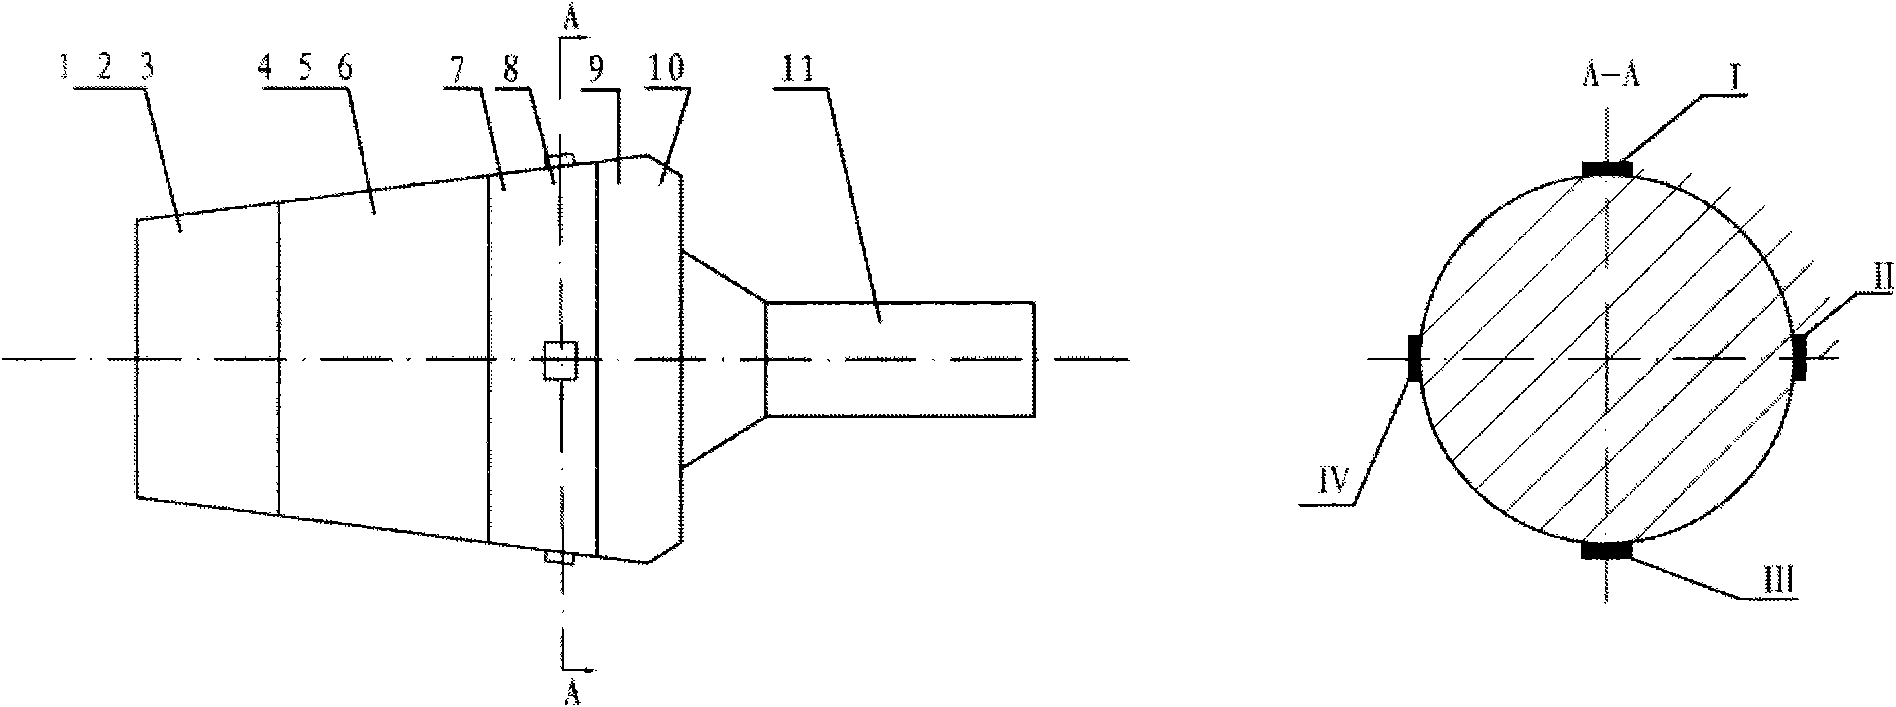 Method for testing assembly performance of rotor of aircraft engine